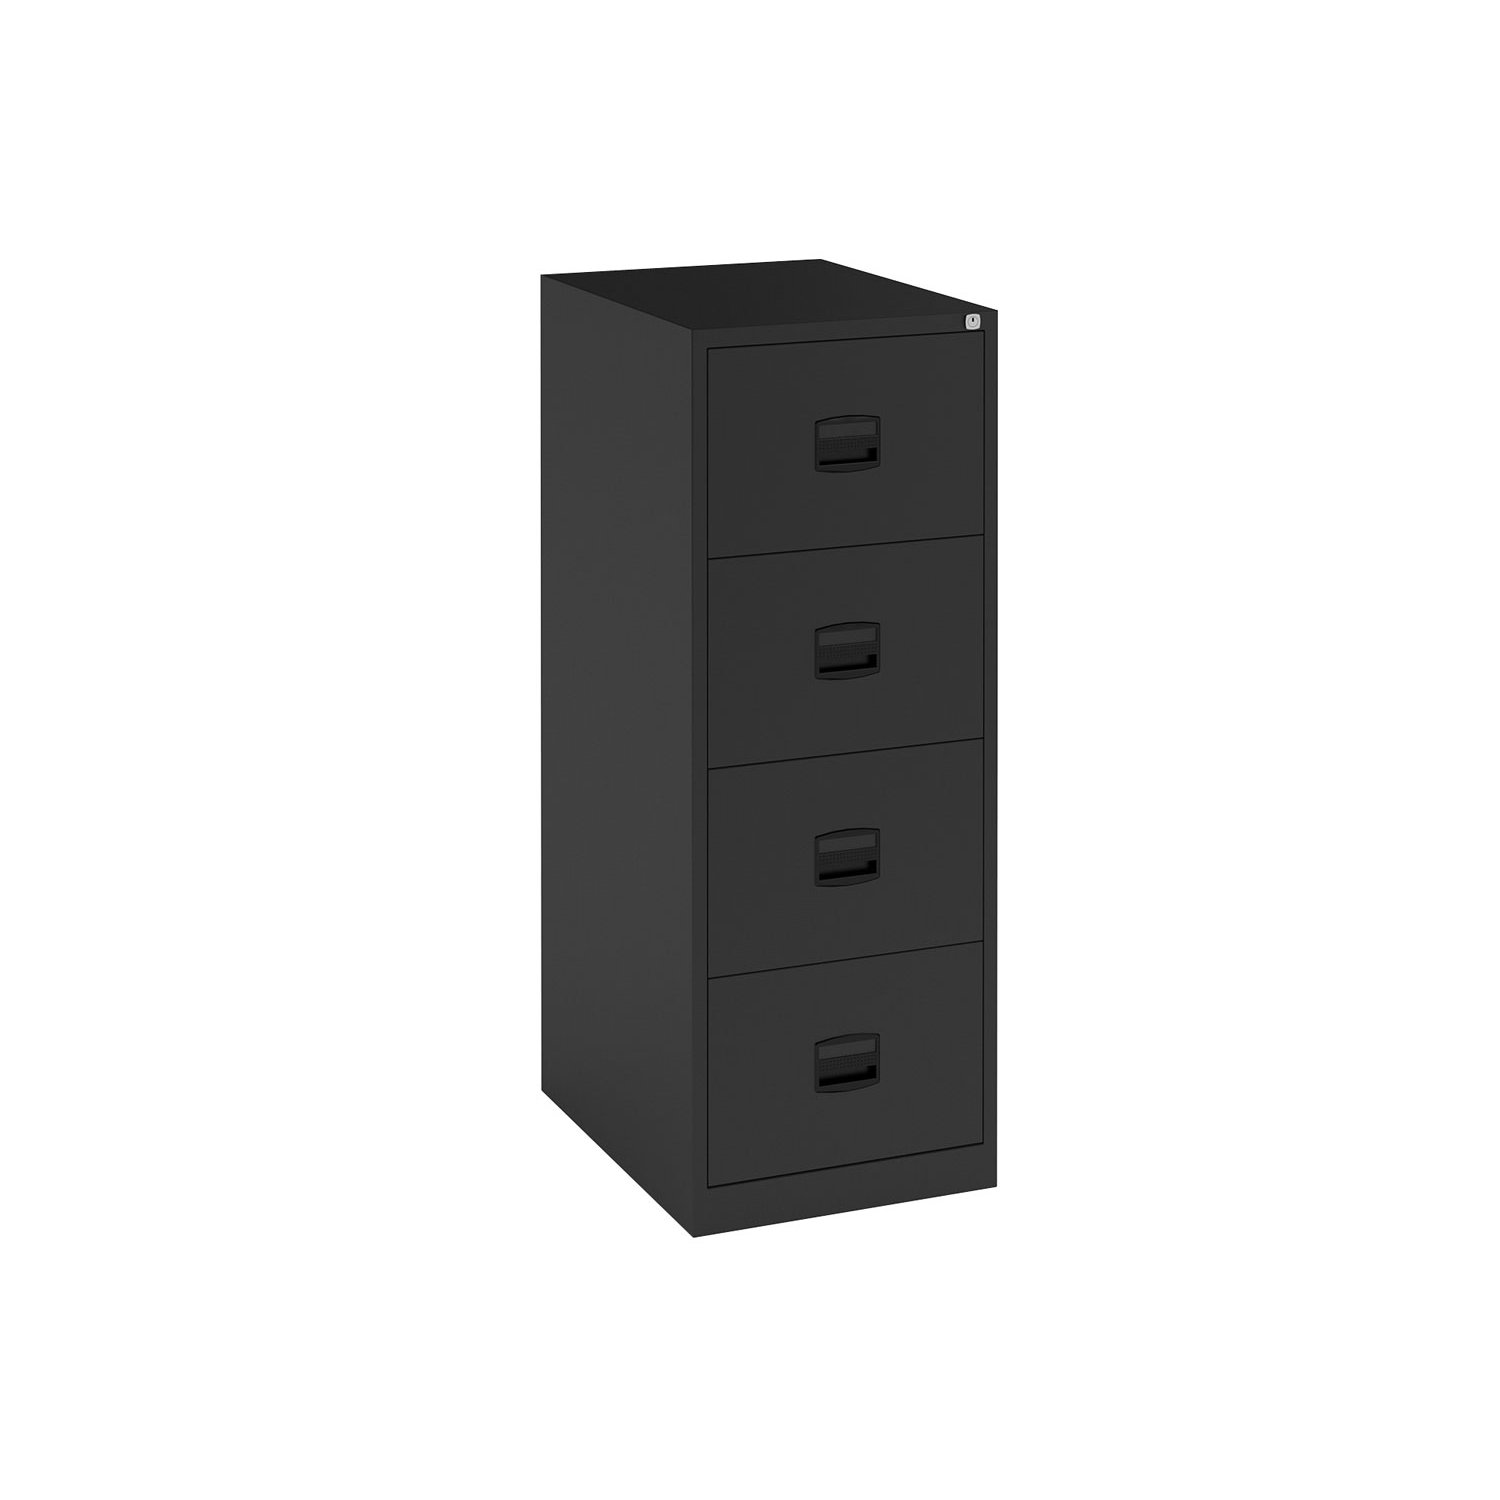 Bisley Contract Filing Cabinet, Black